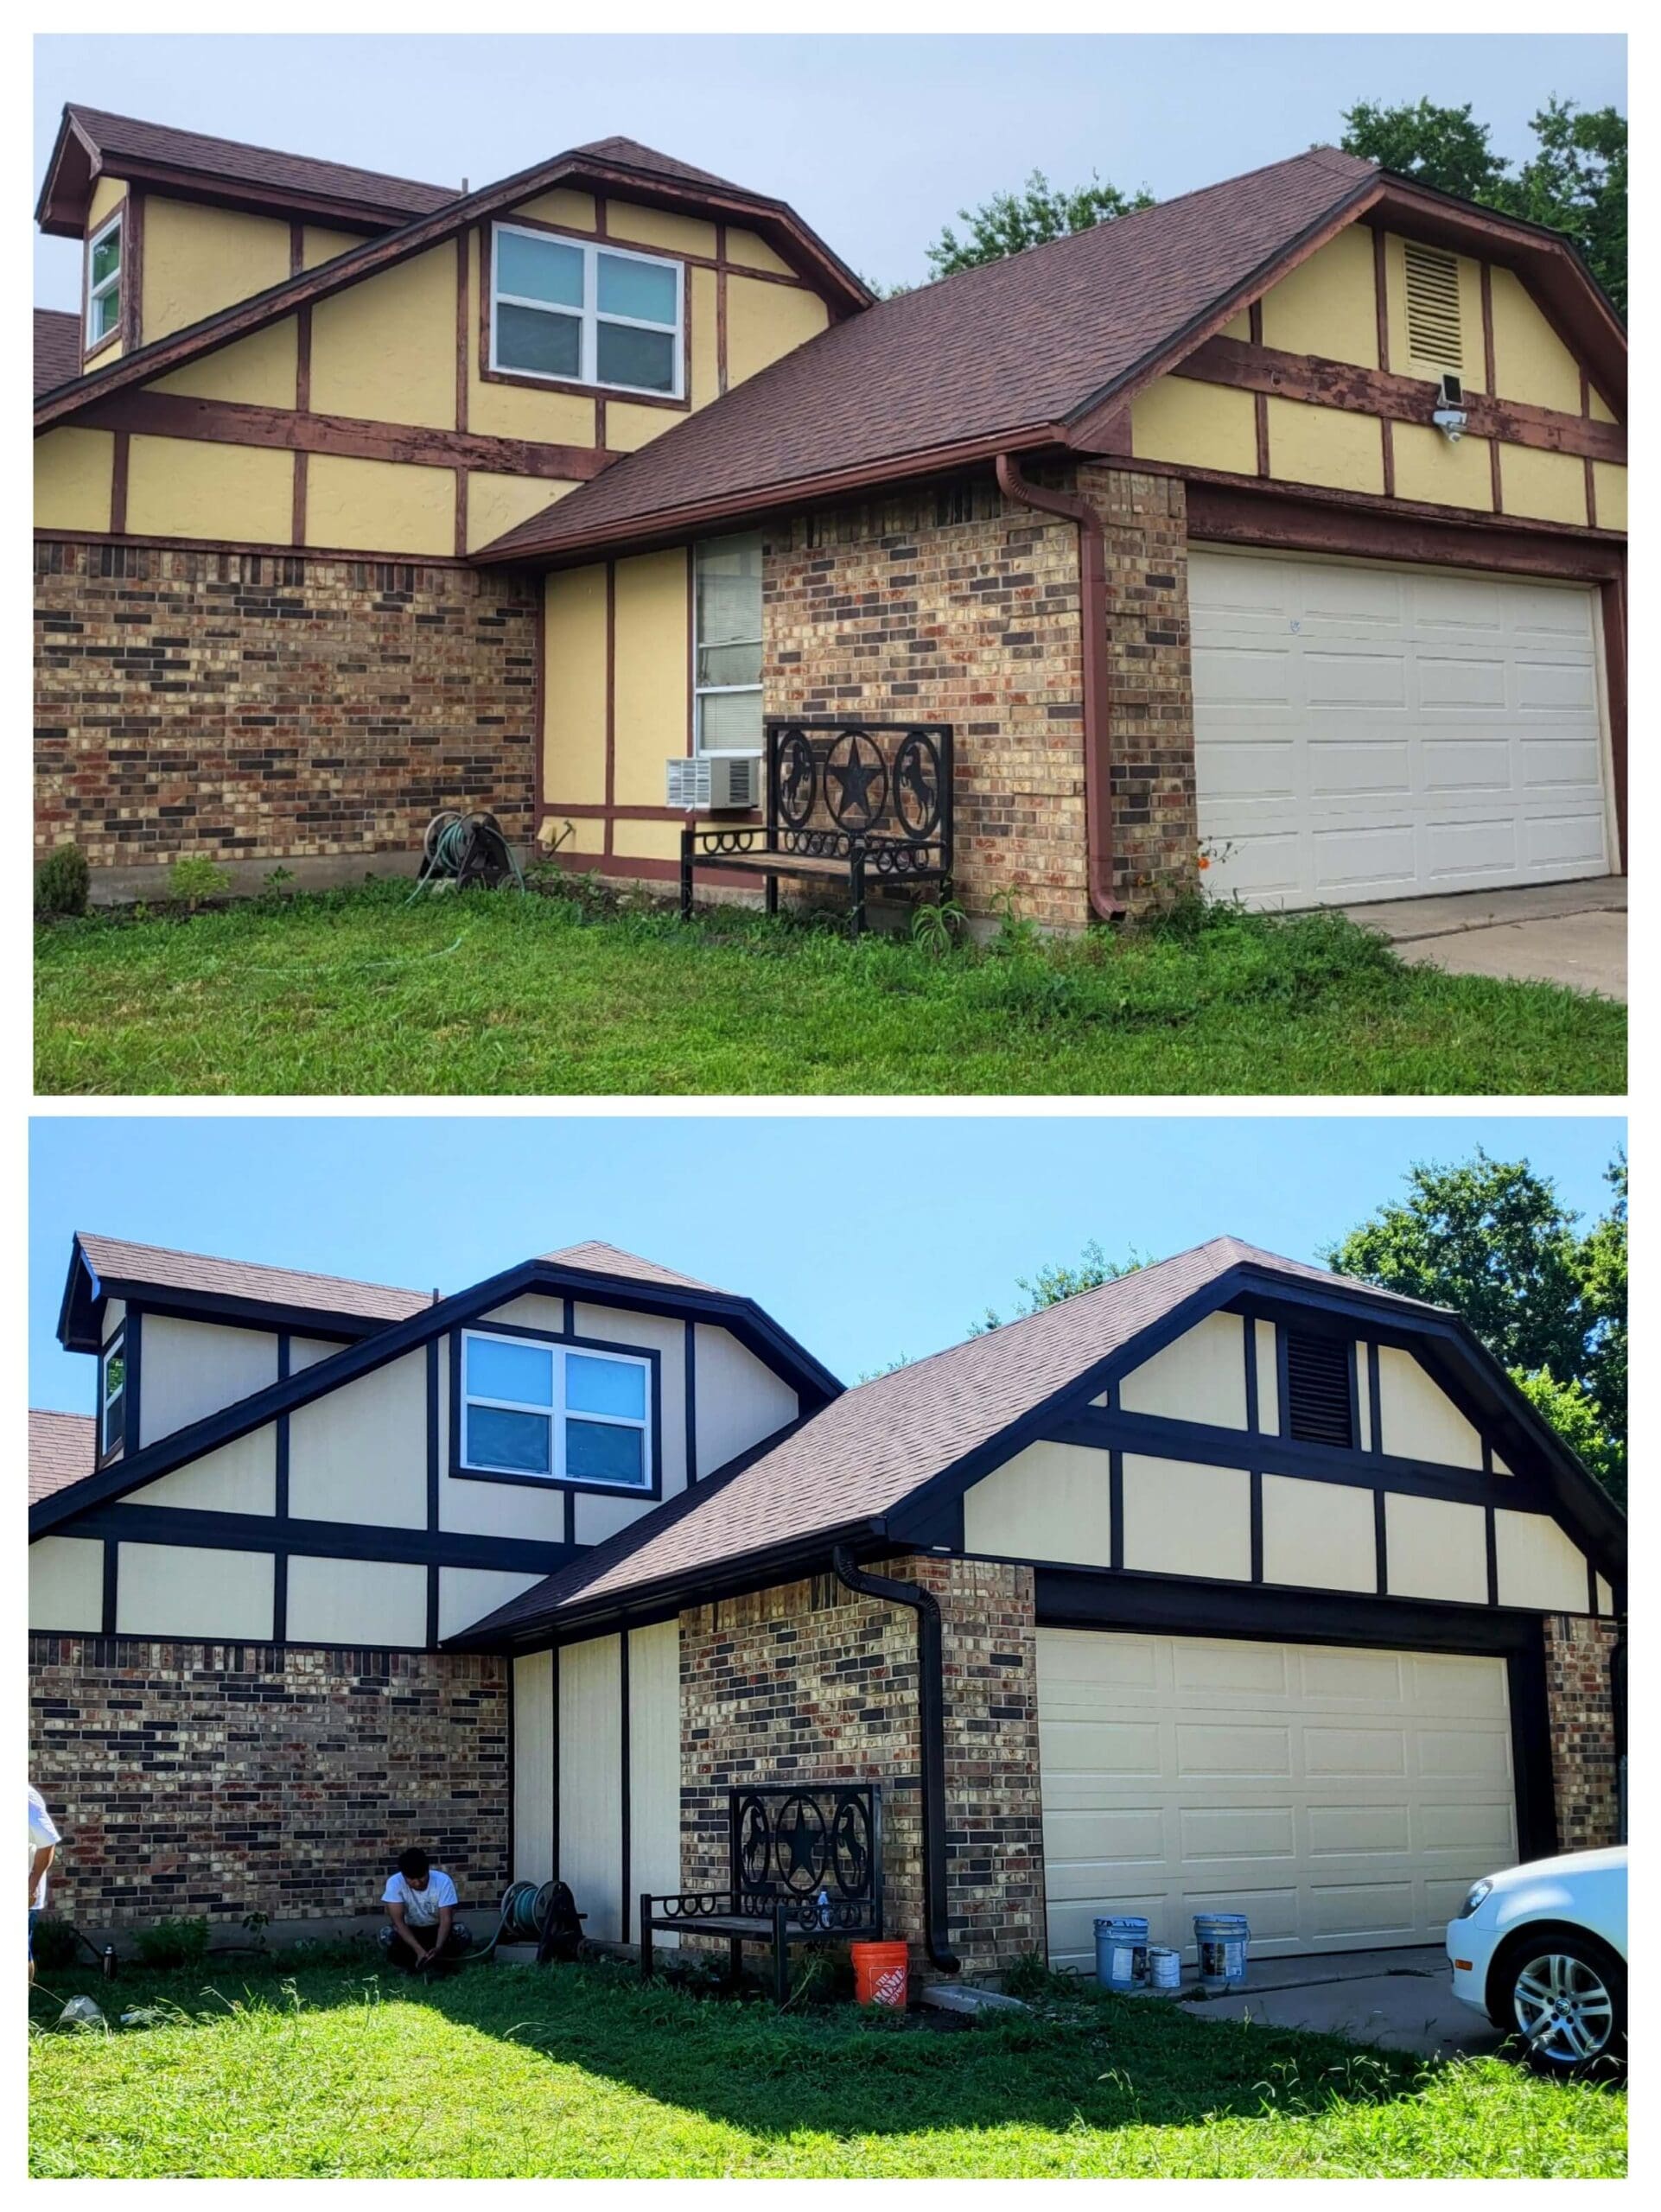 Before and after: house with a exterior paint transformed, showcasing the stunning renovation.